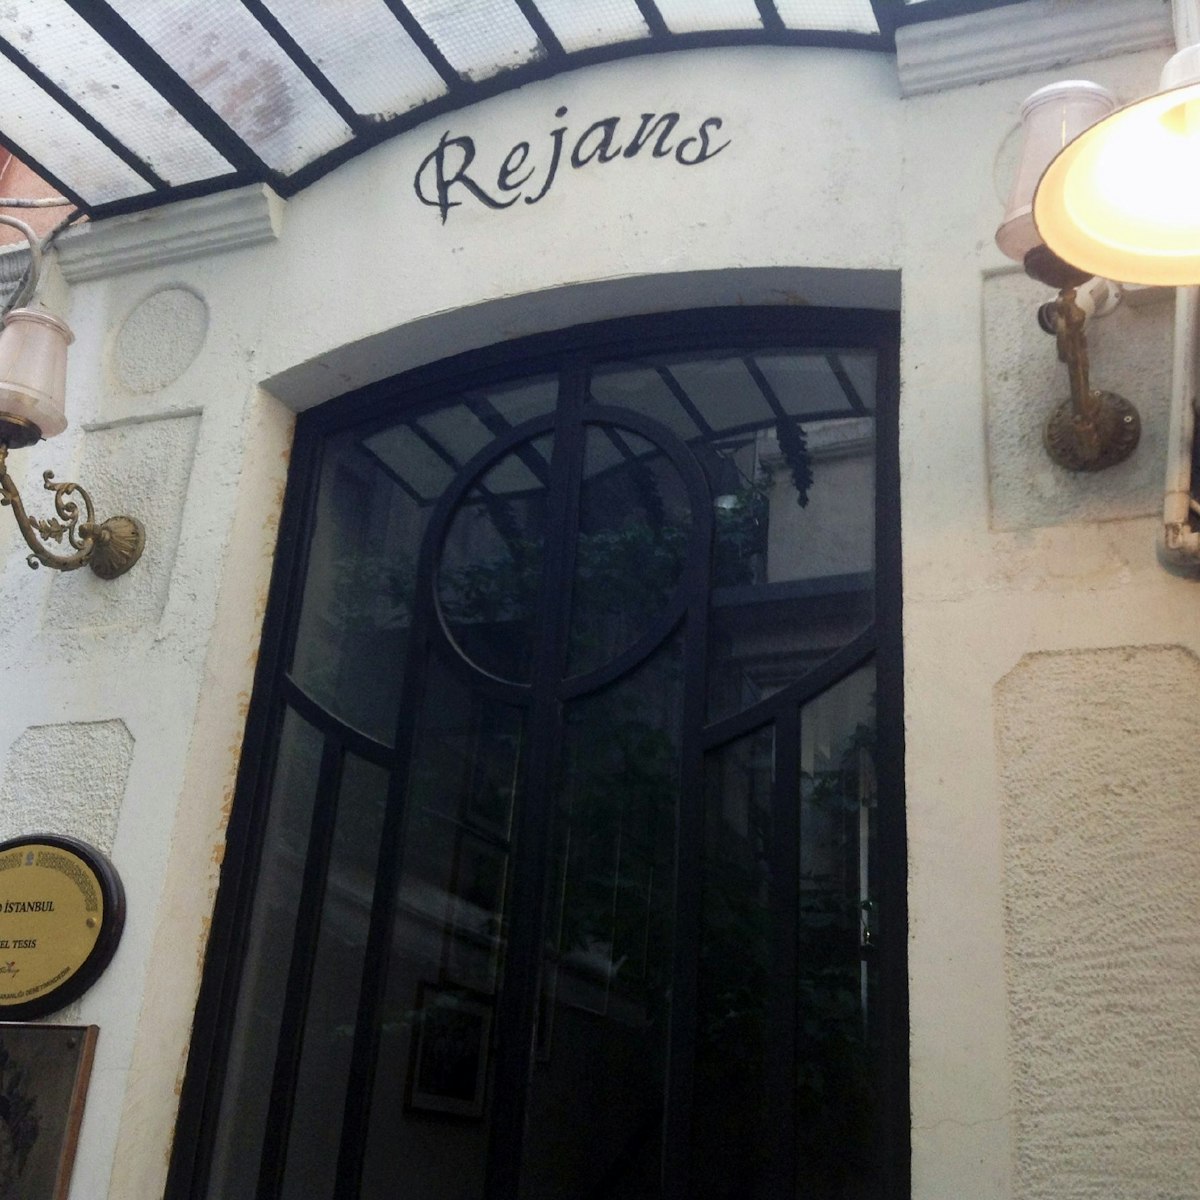 Entrance to 1924 Istanbul restaurant, formerly known as Rejans